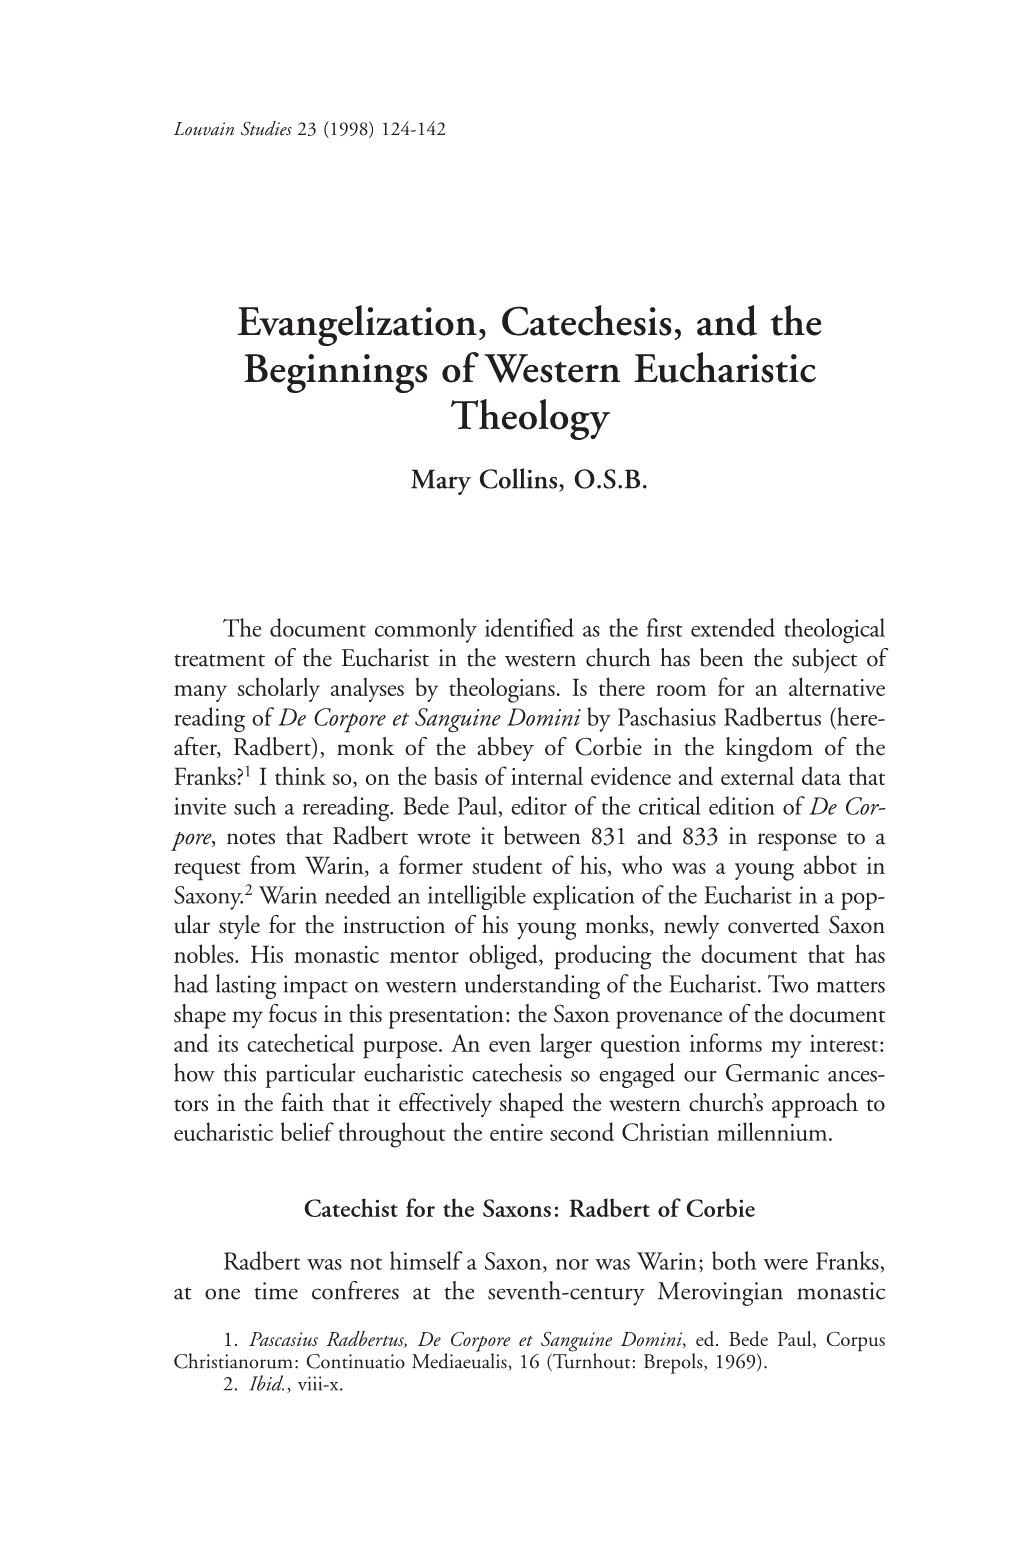 Evangelization, Catechesis, and the Beginnings of Western Eucharistic Theology Mary Collins, O.S.B